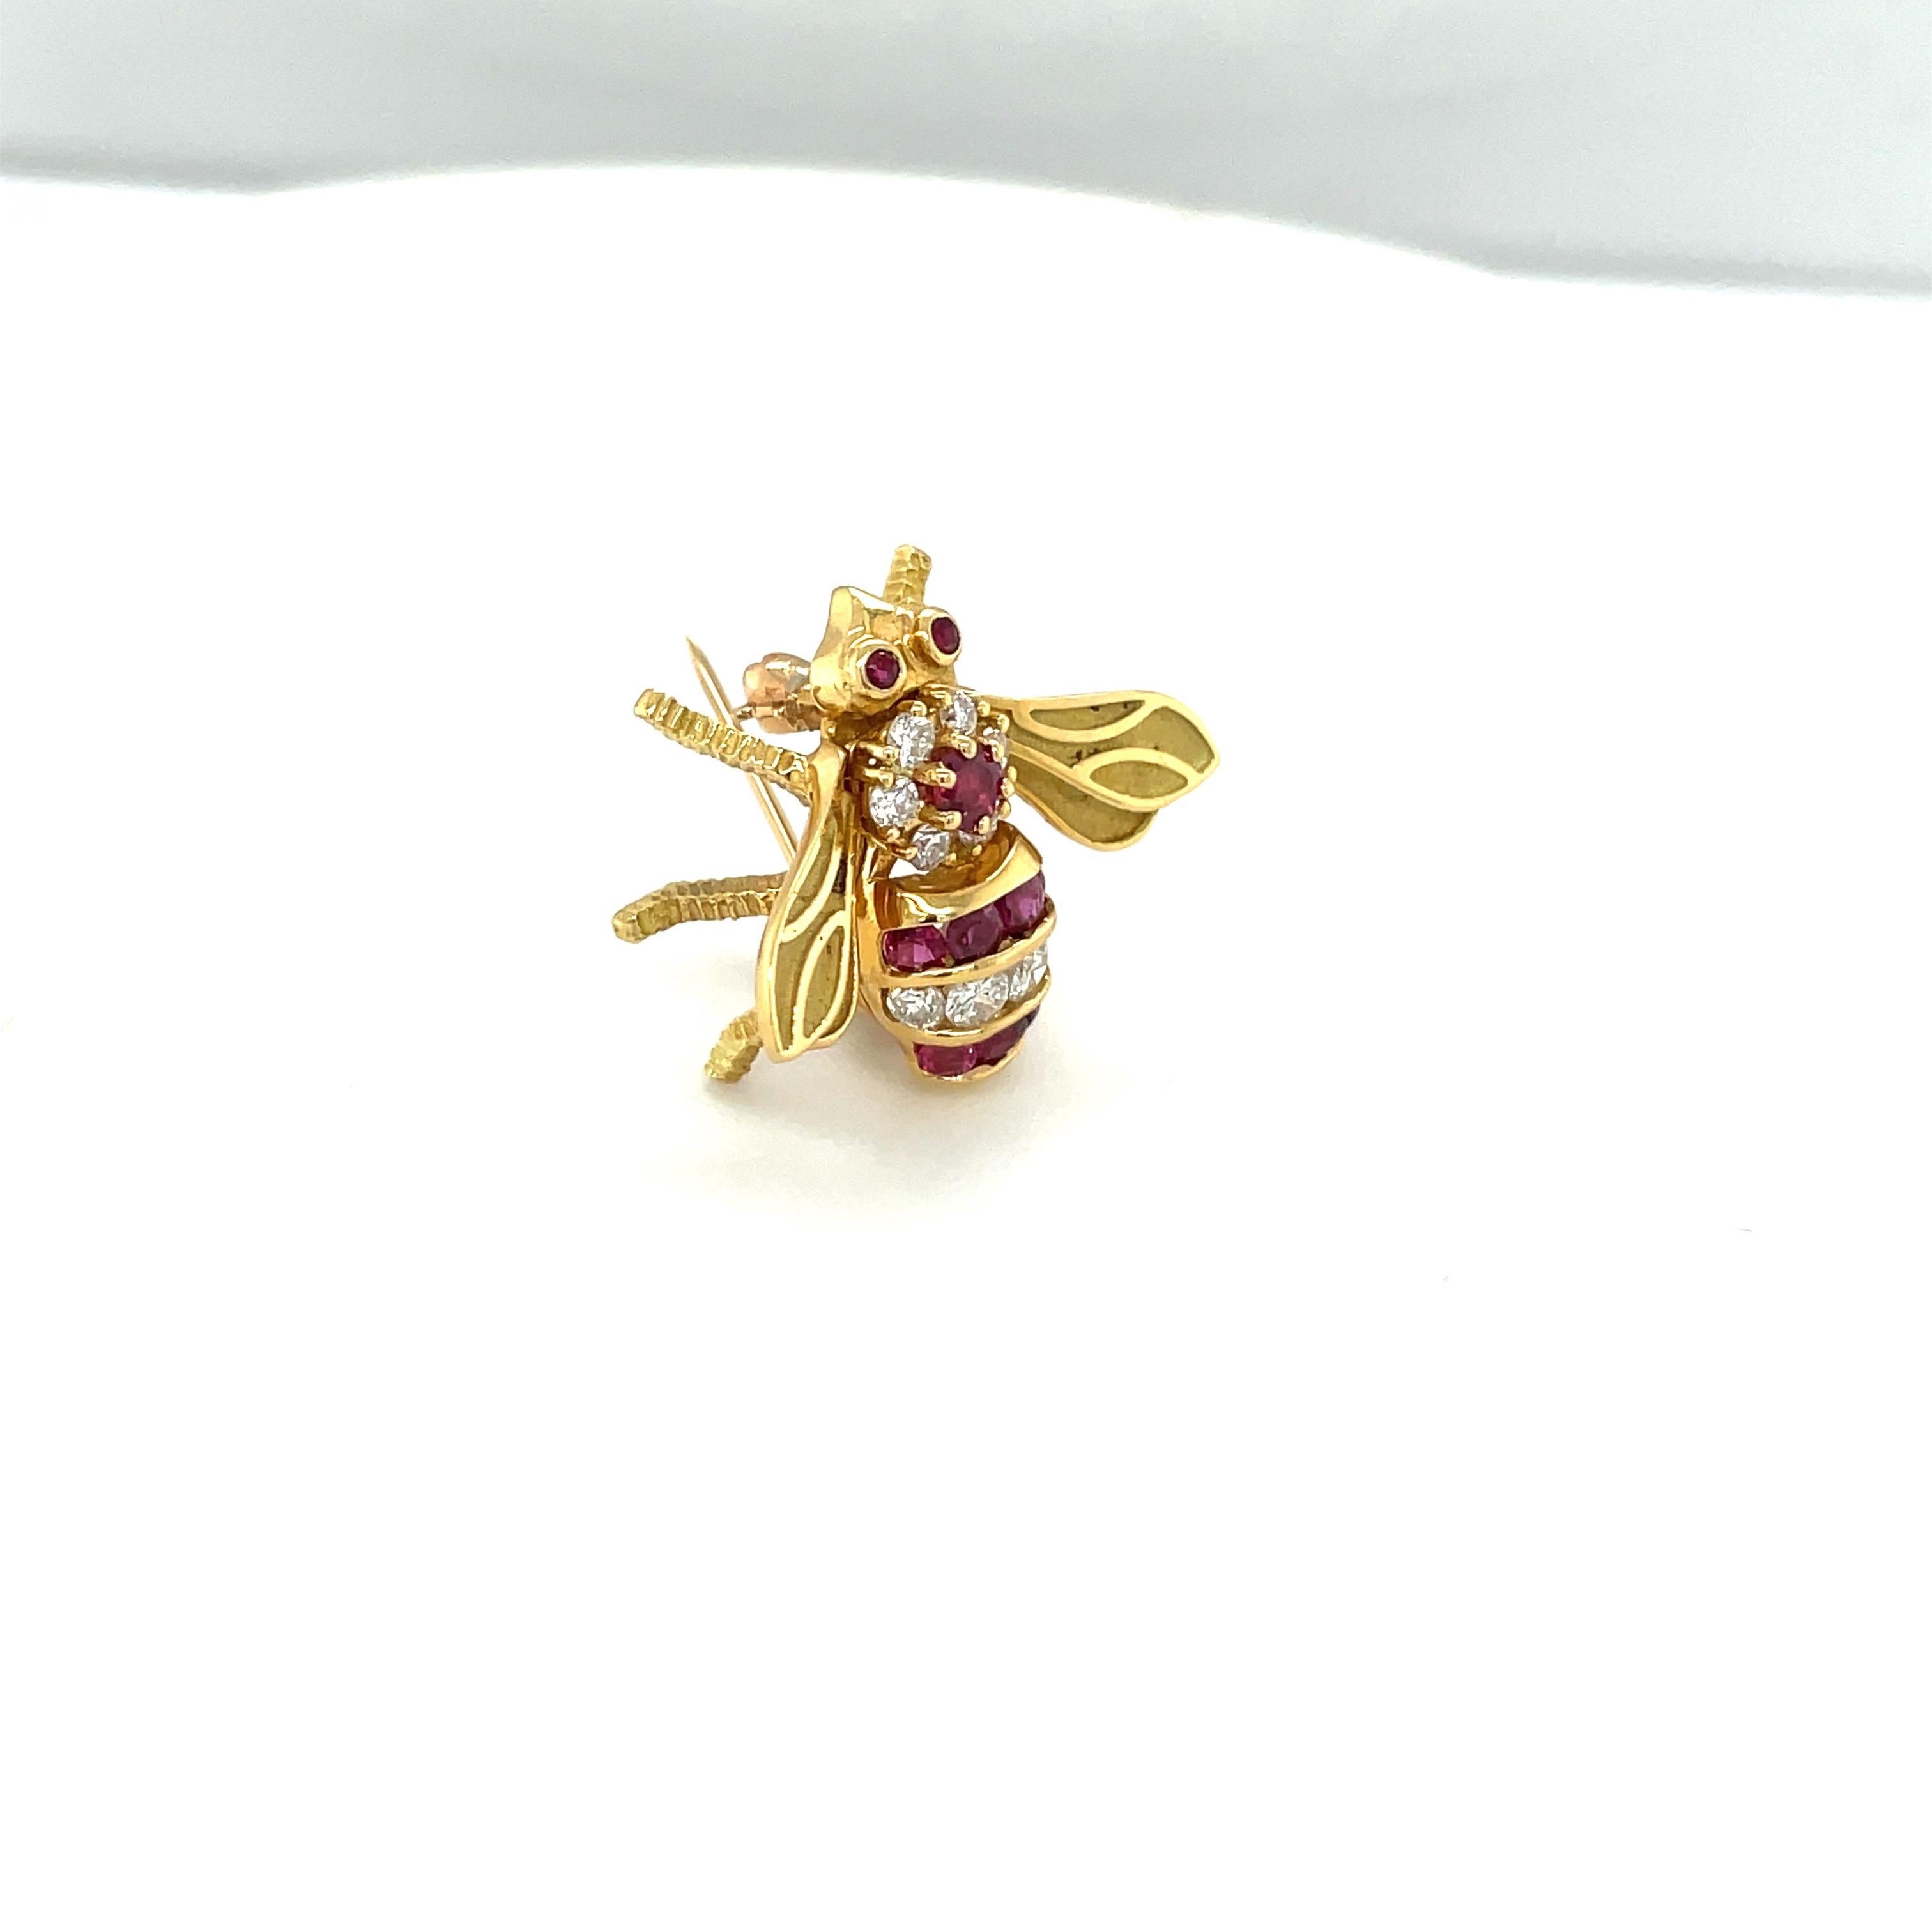 Retro 18KT Yellow Gold Bee Brooch with Ruby 0.80Ct. & Diamond 0.49Ct For Sale